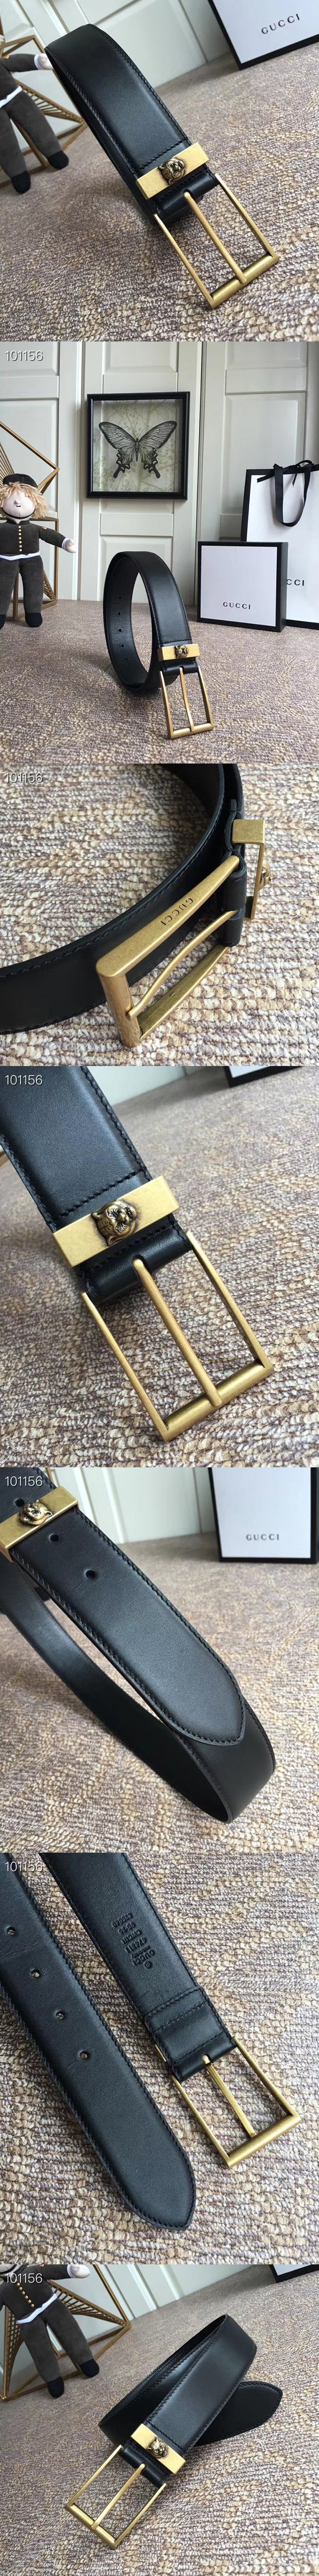 Replica Gucci 474811 4cm Leather belt Gold buckle in Black leather